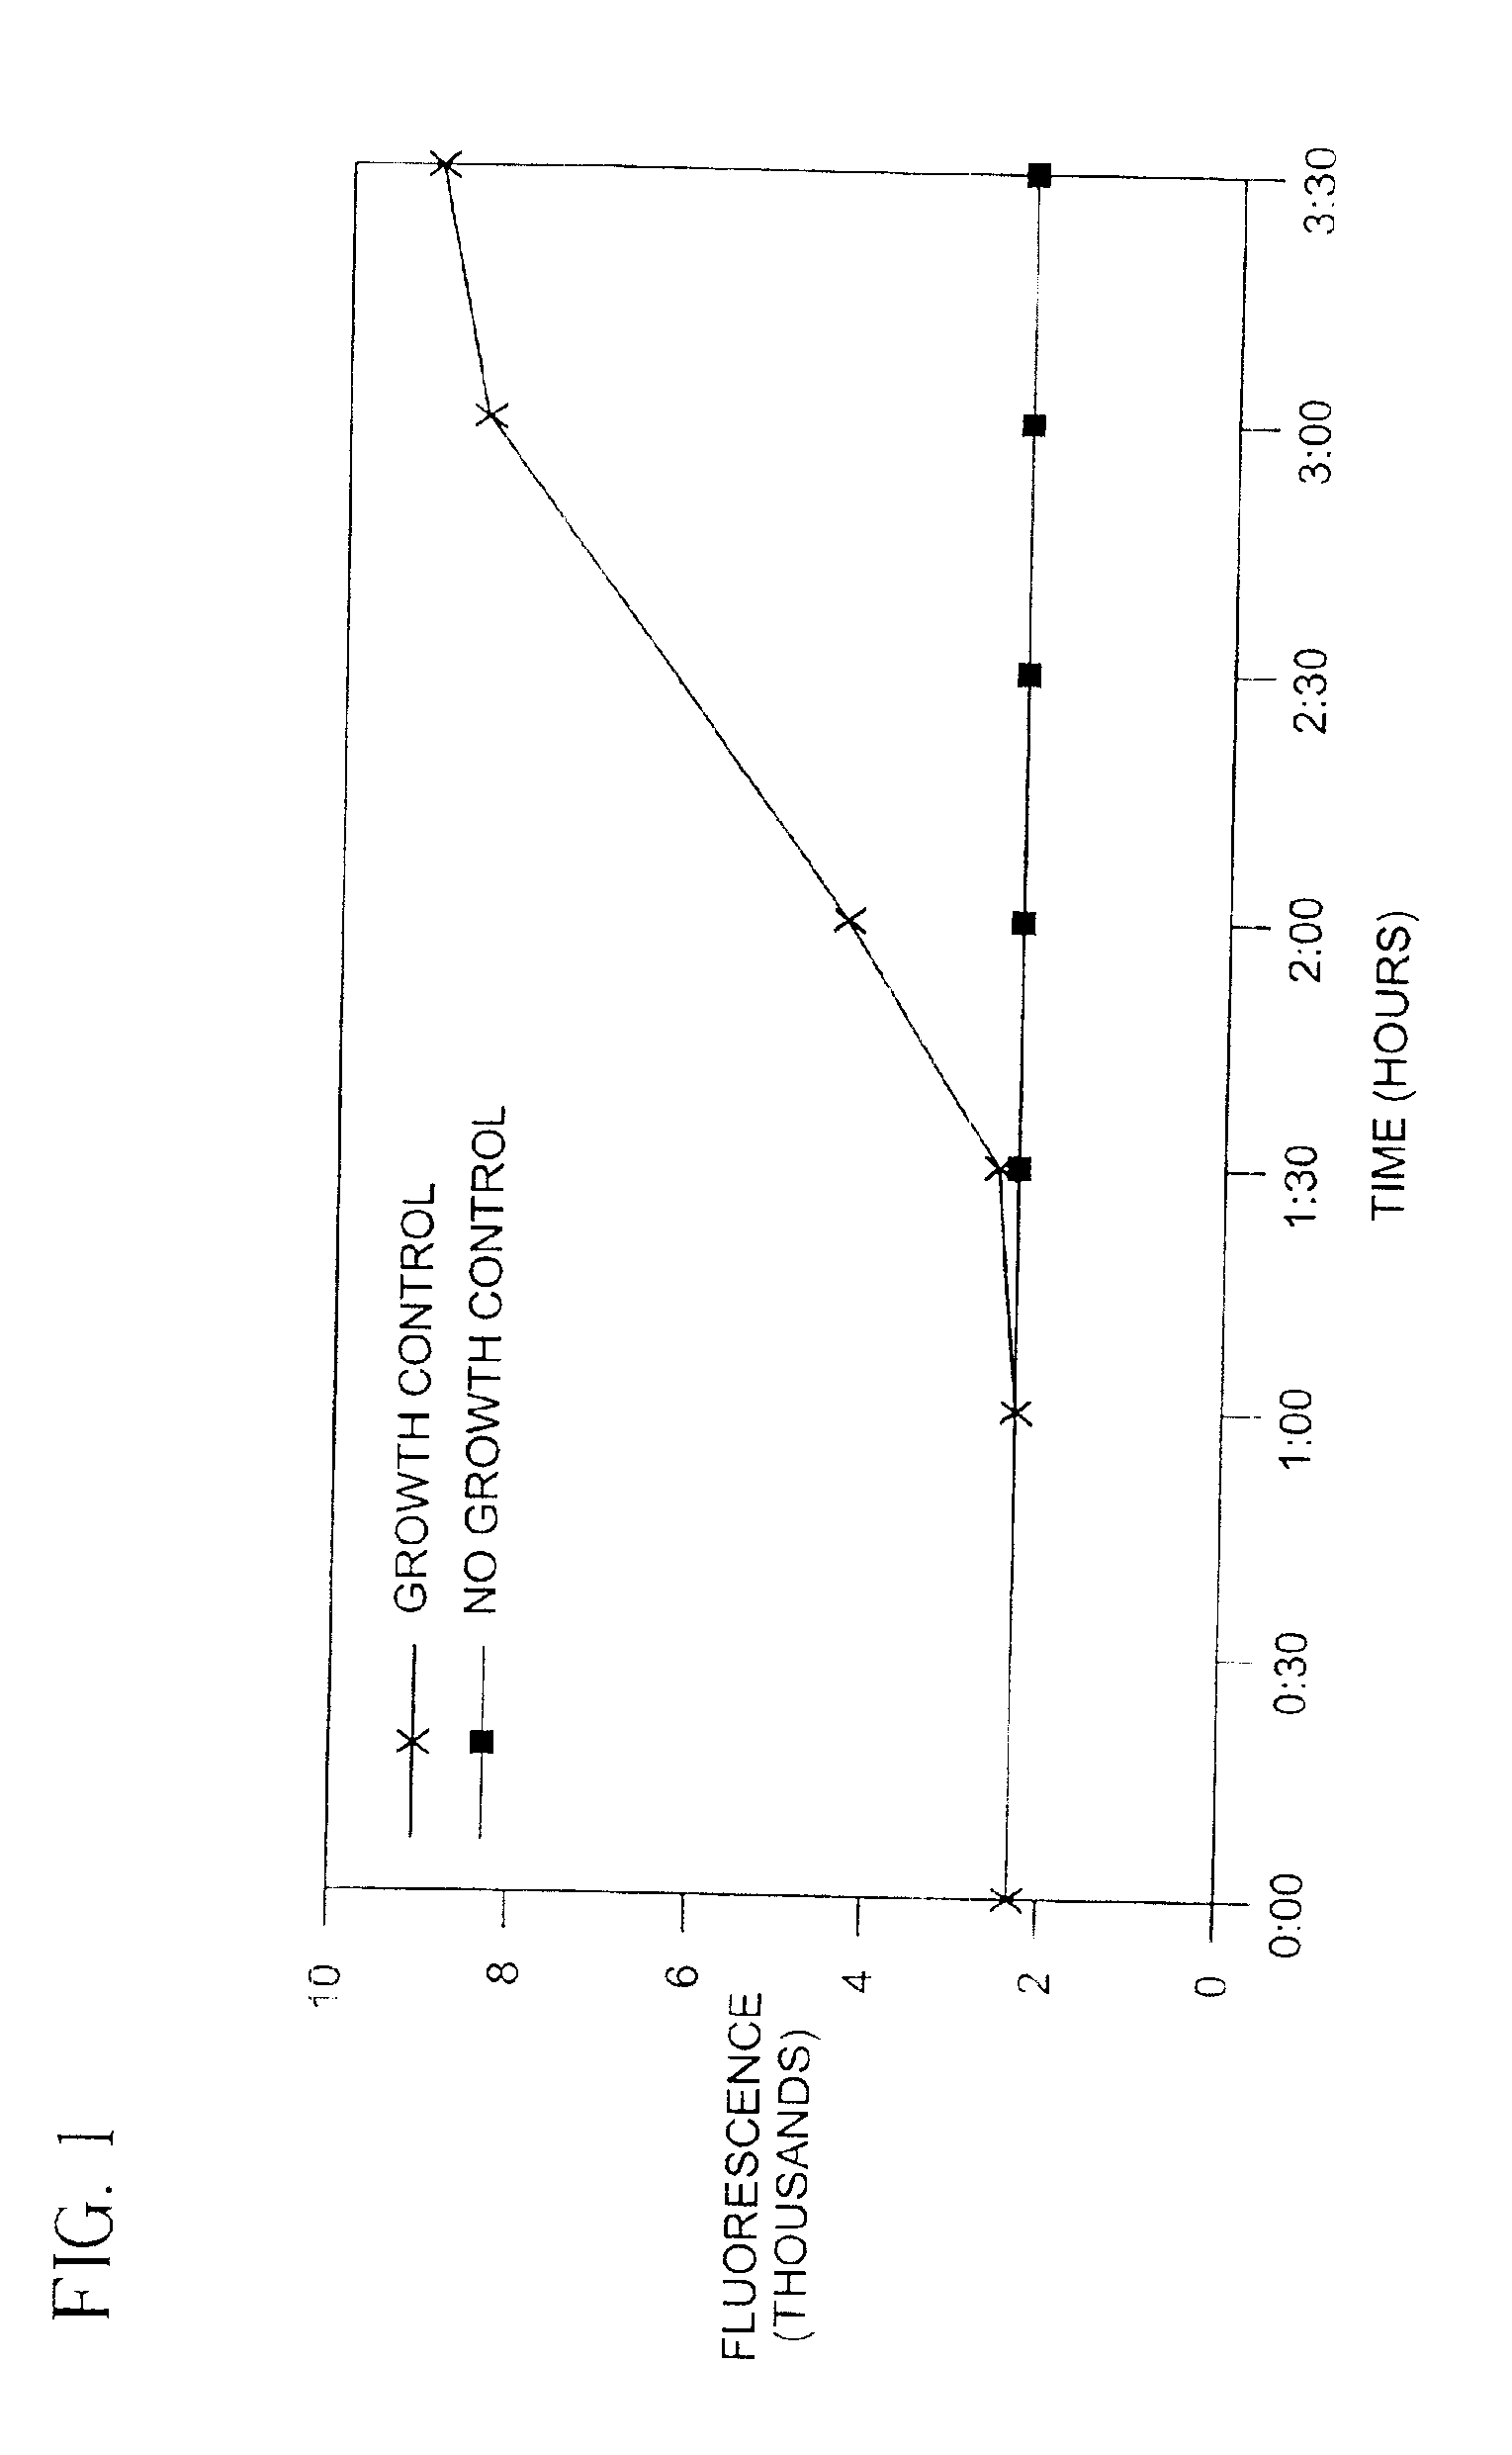 Device for monitoring cells